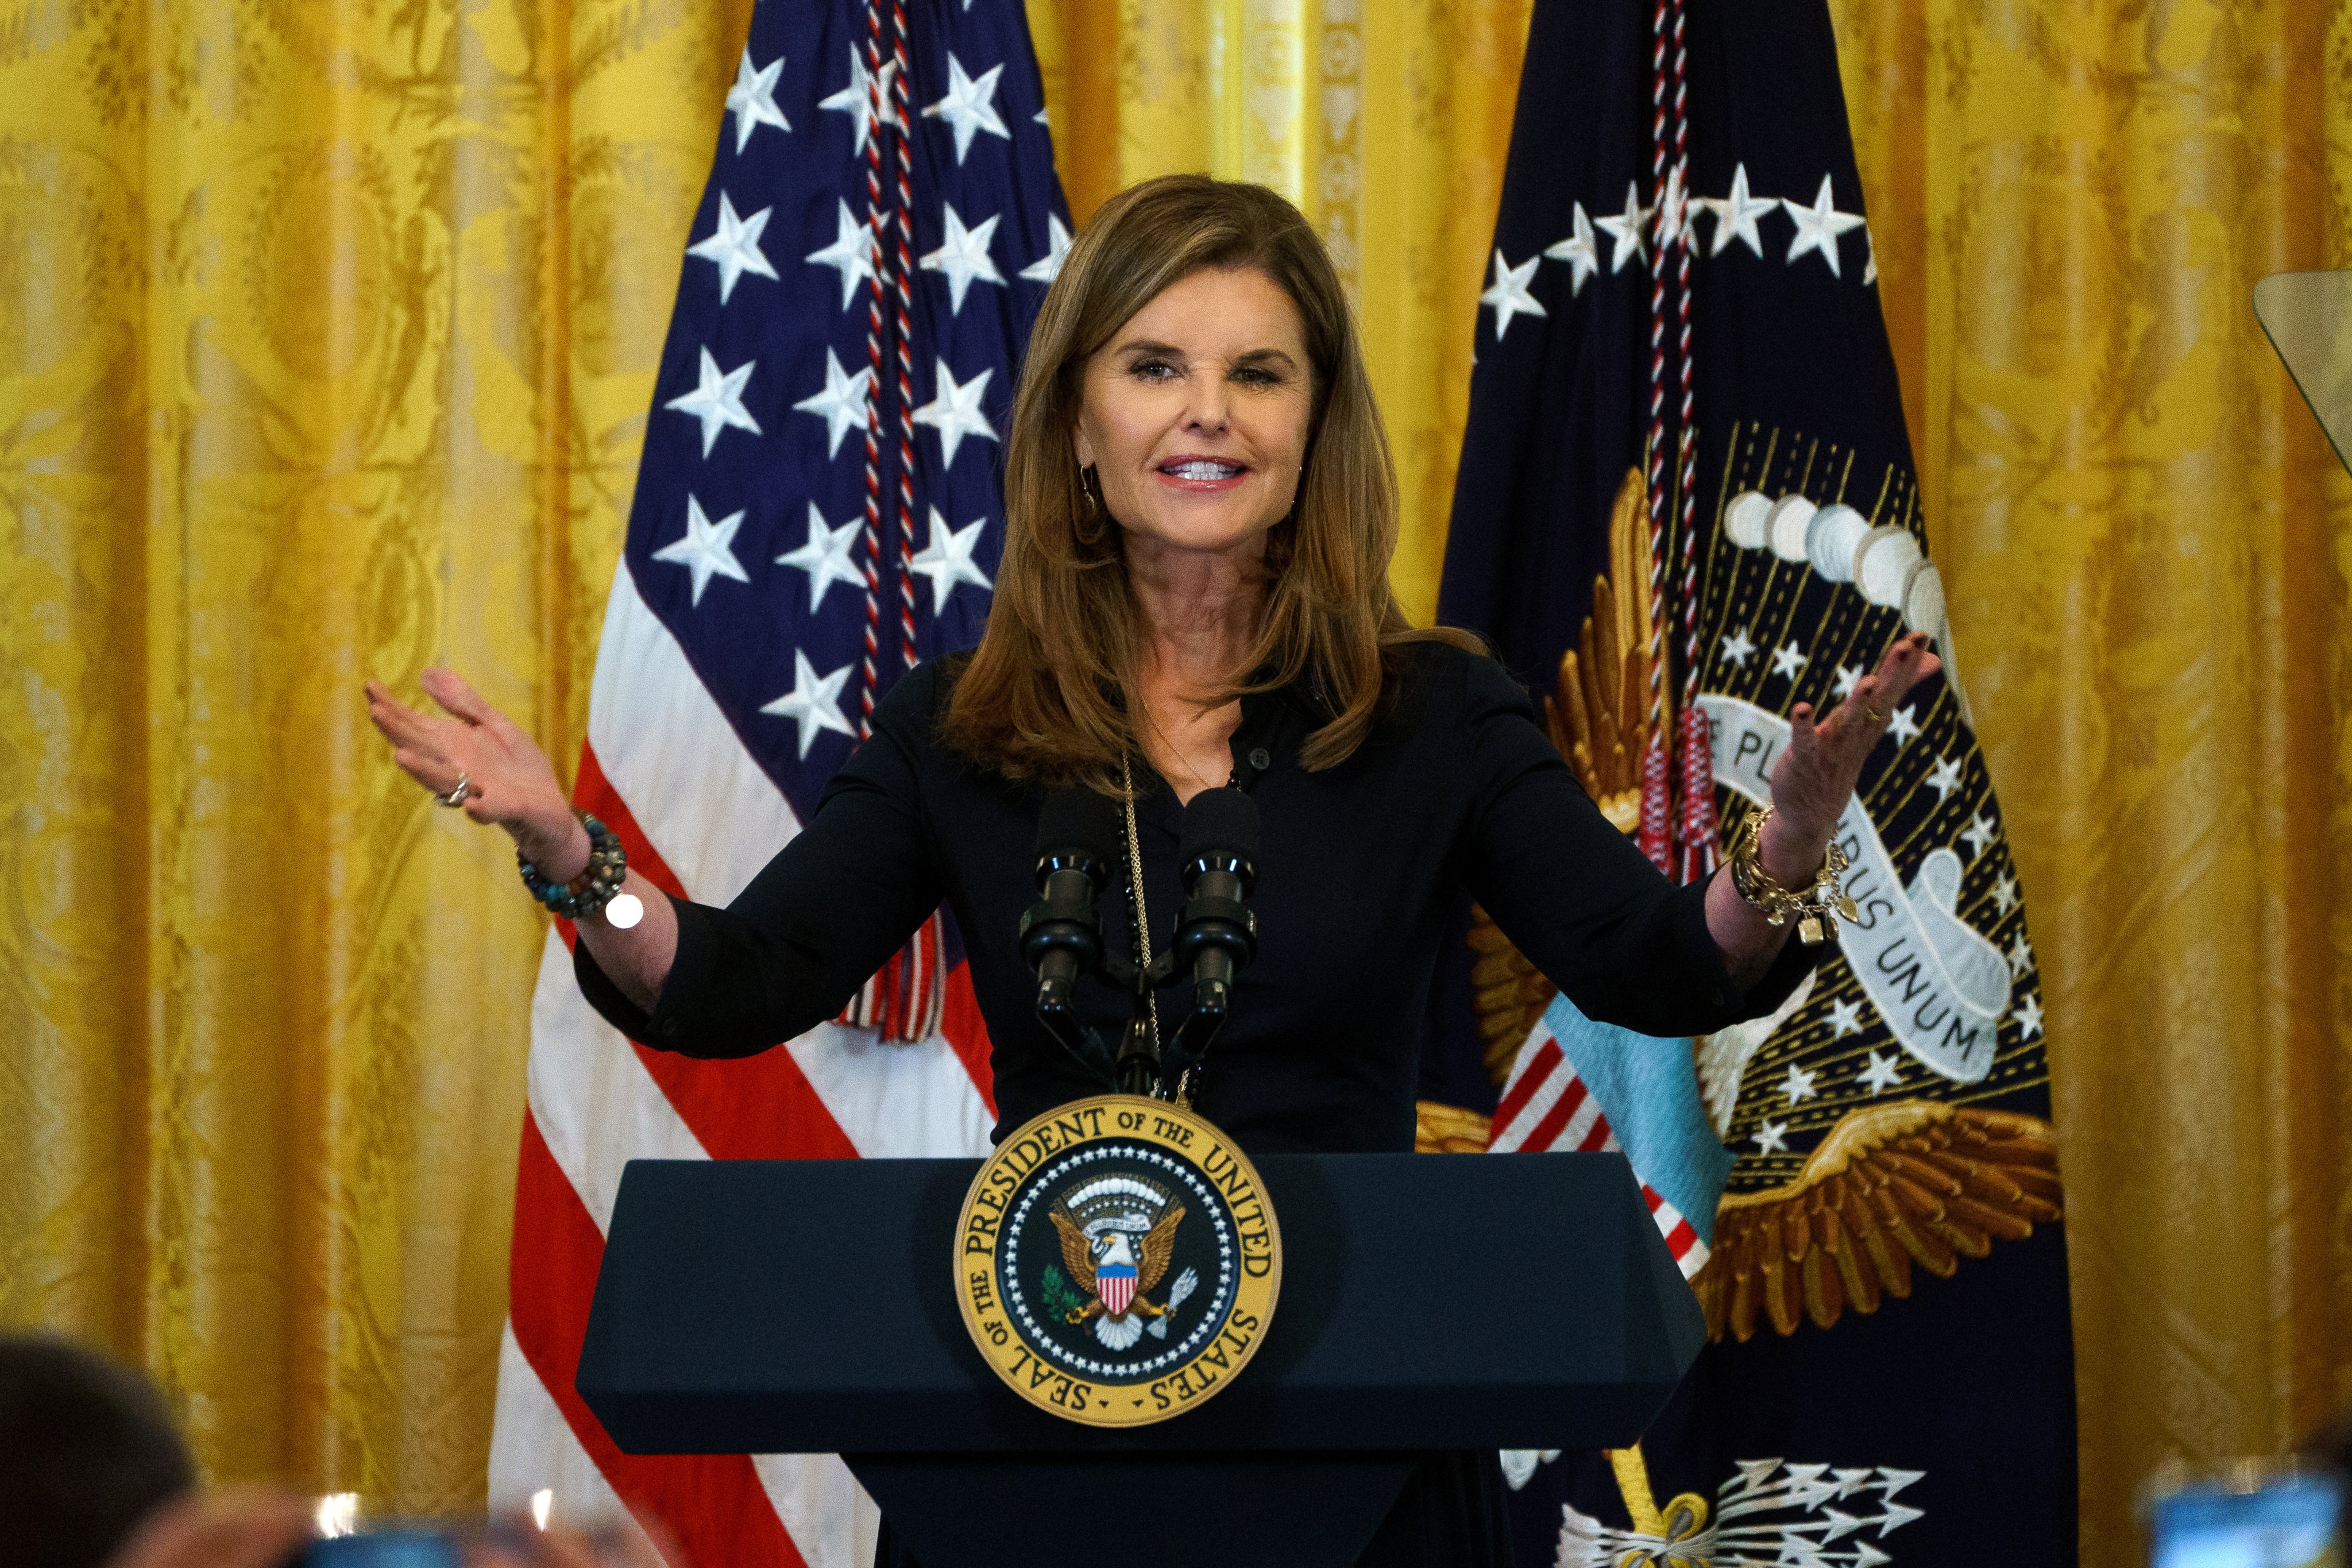 Maria Shriver may have been born into political royalty, but she’s carved a career path in journalism instead. Photo: EPA-EFE